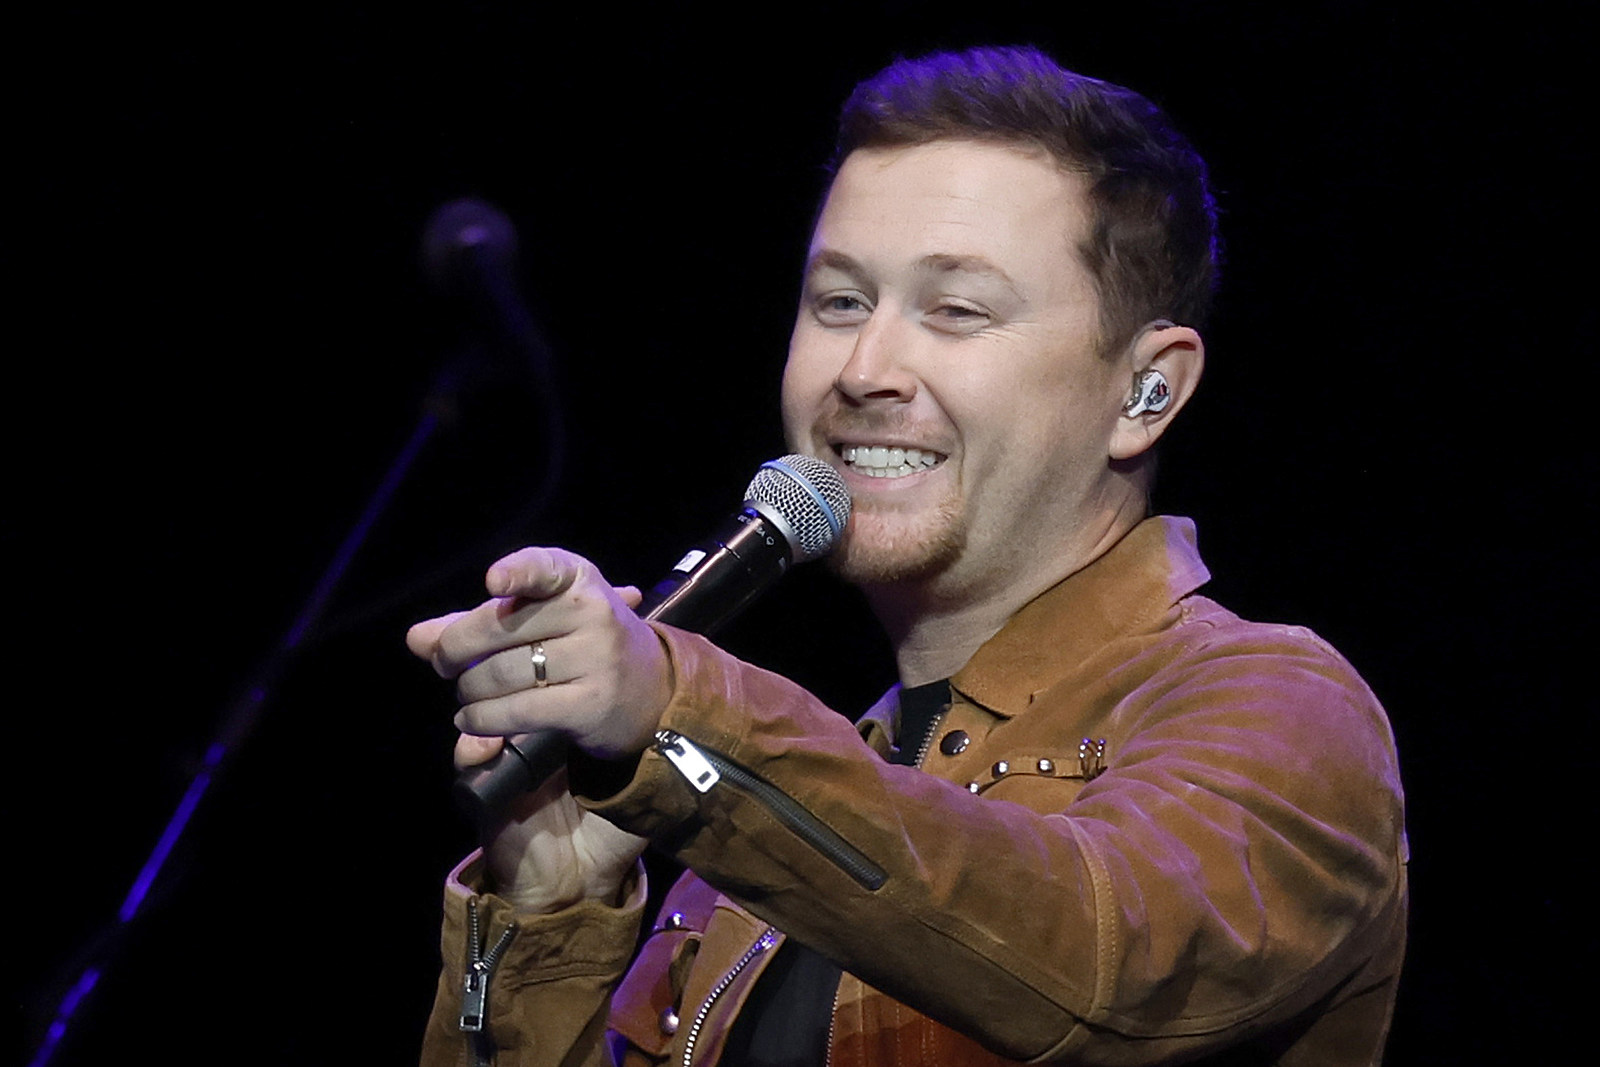 Scotty McCreery, ‘Can’t Pass the Bar’ Lyrics Describe a Country
Boy’s Friday Night 